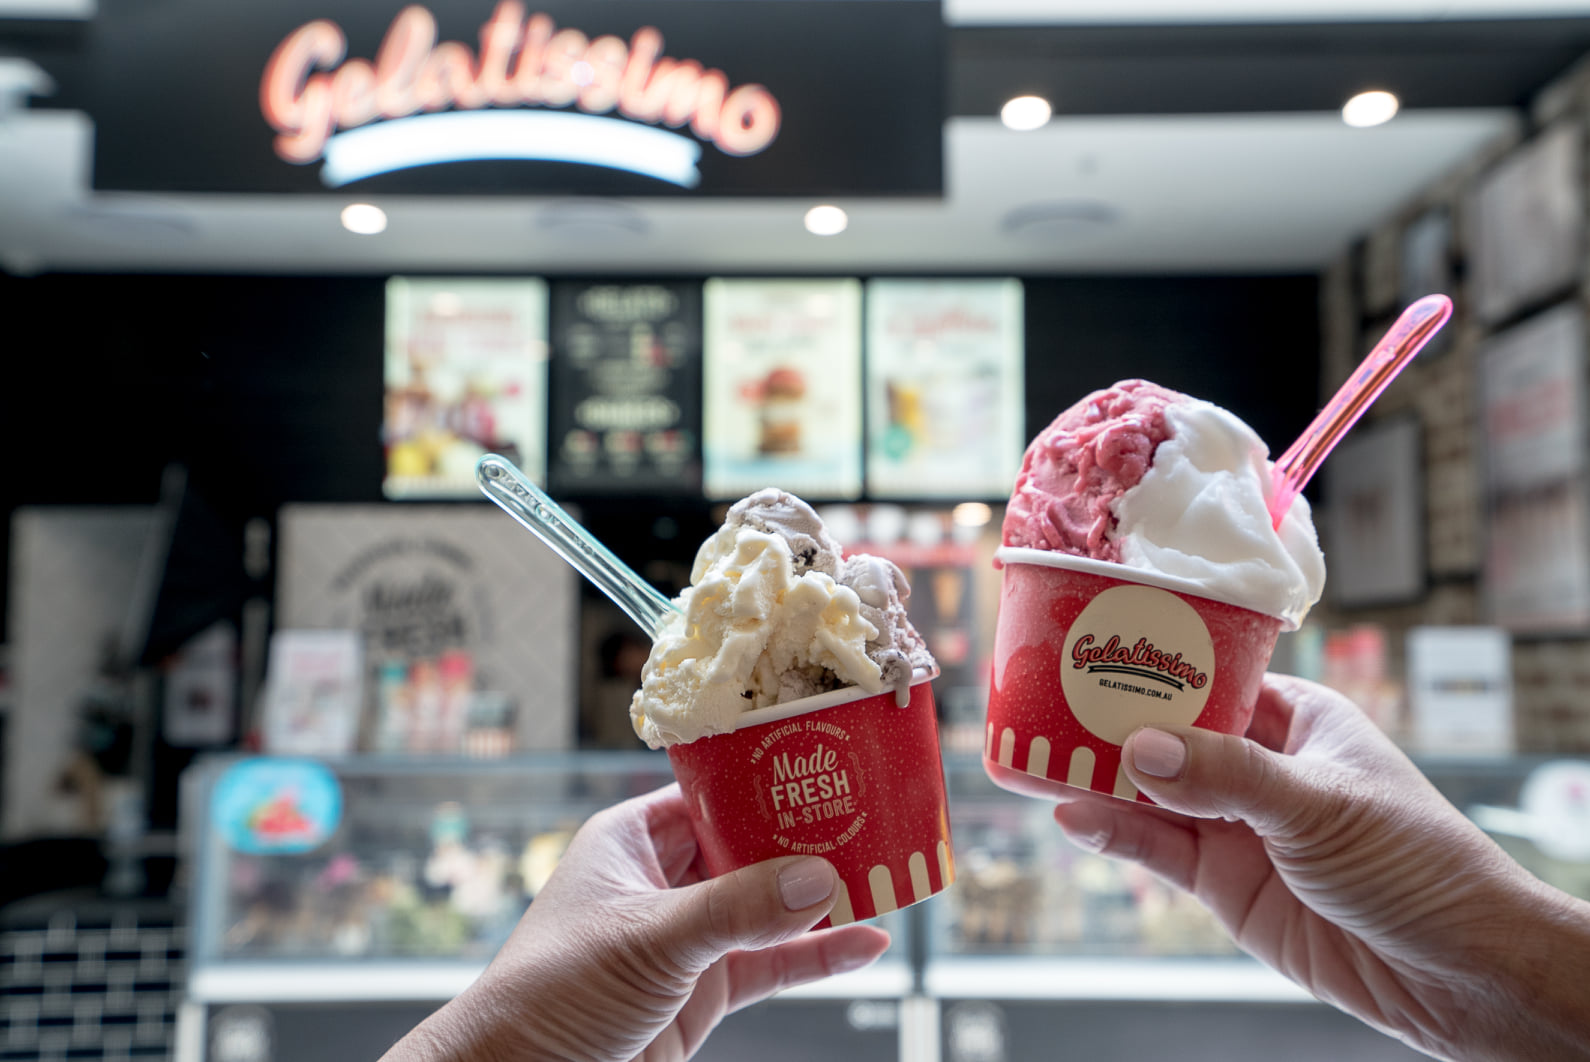 1-for-1 gelato treat at Gelatissimo for subscribers of The Straits Times